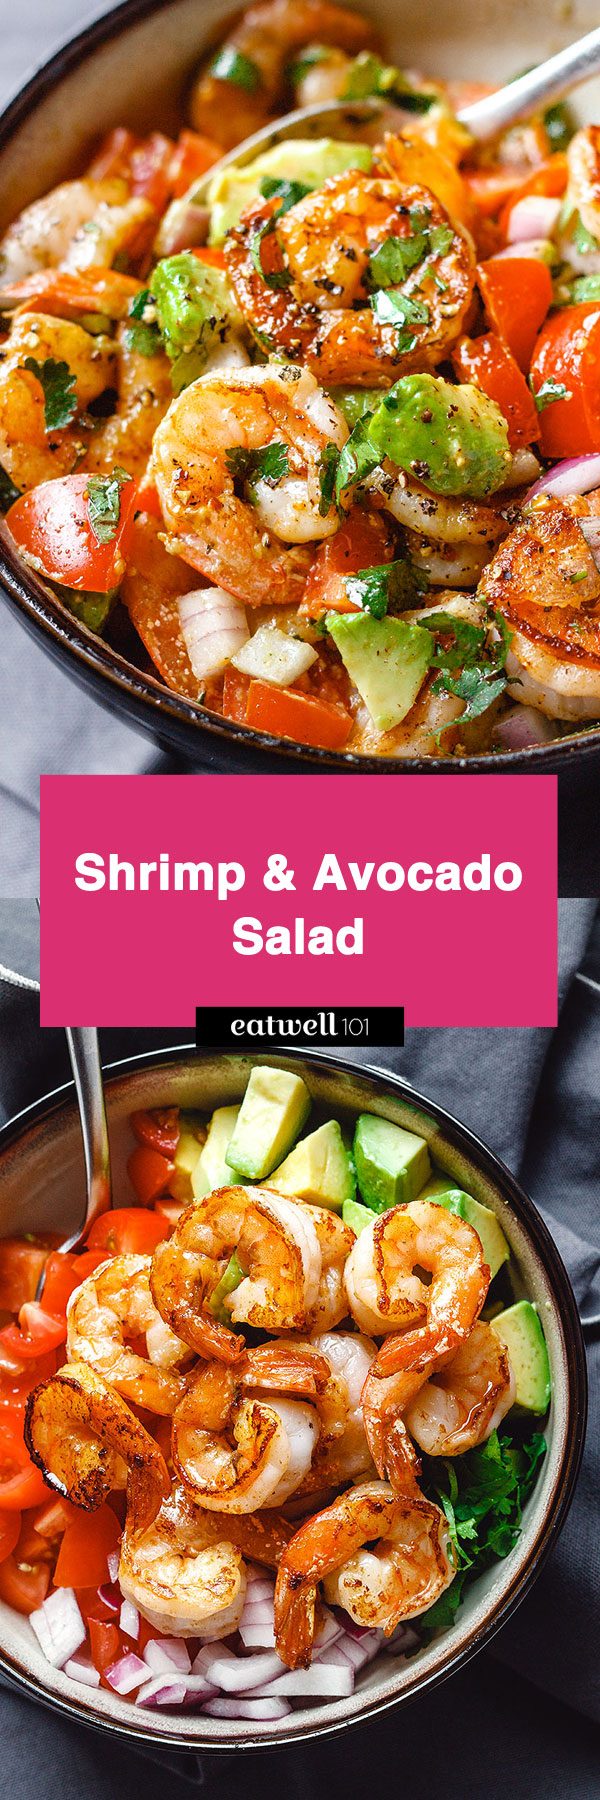 Shrimp and Avocado Salad - #eatwell101 #recipe #paleo #keto #lowcarb #shrimp #salad - Fresh, easy, and filling! This healthy salad for two tastes crazy good and is loaded with the freshest ingredients!